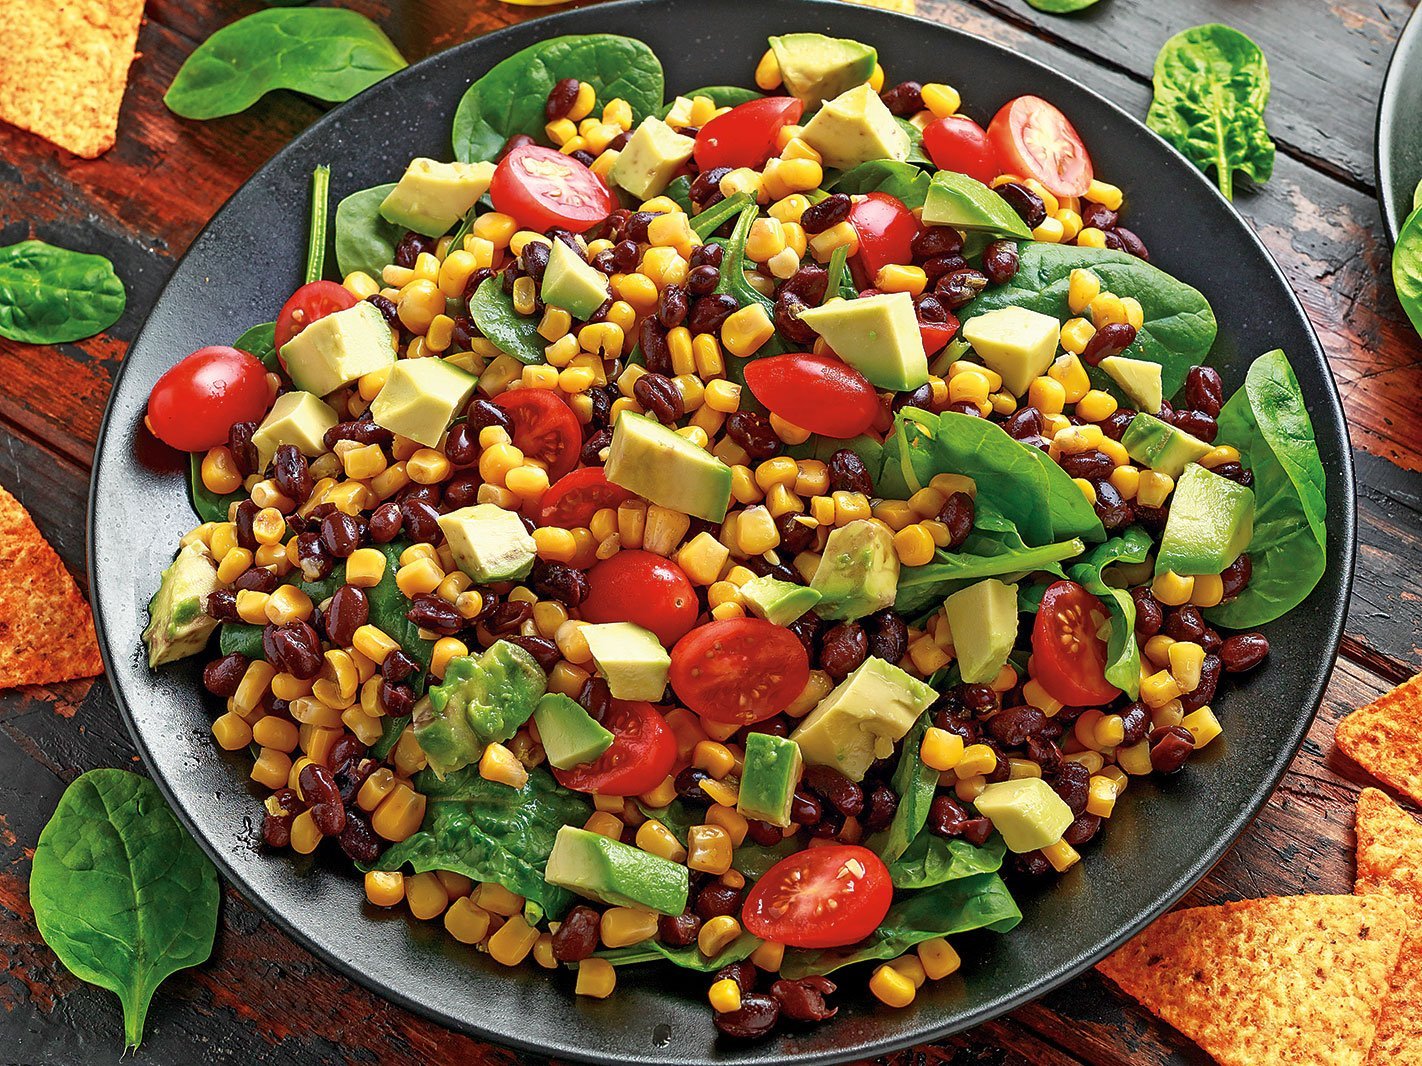 Mexican Salad With Avocado, Black Beans, Sweet Corn, Spinach, Tomatoes And Tortilla Chips